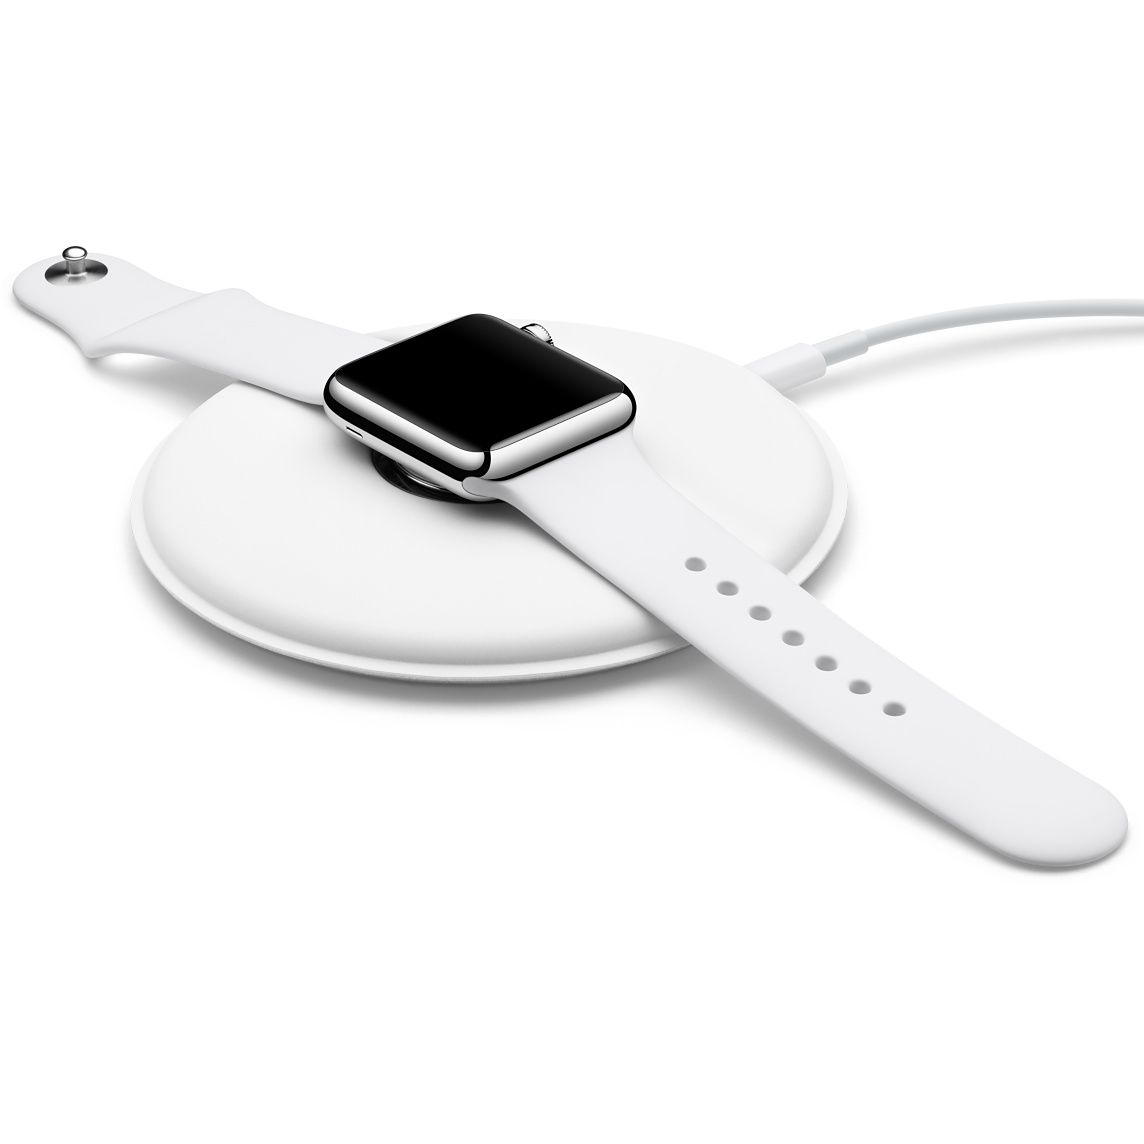 Apple Watch Magnetic Charging Dock Official Available for $79